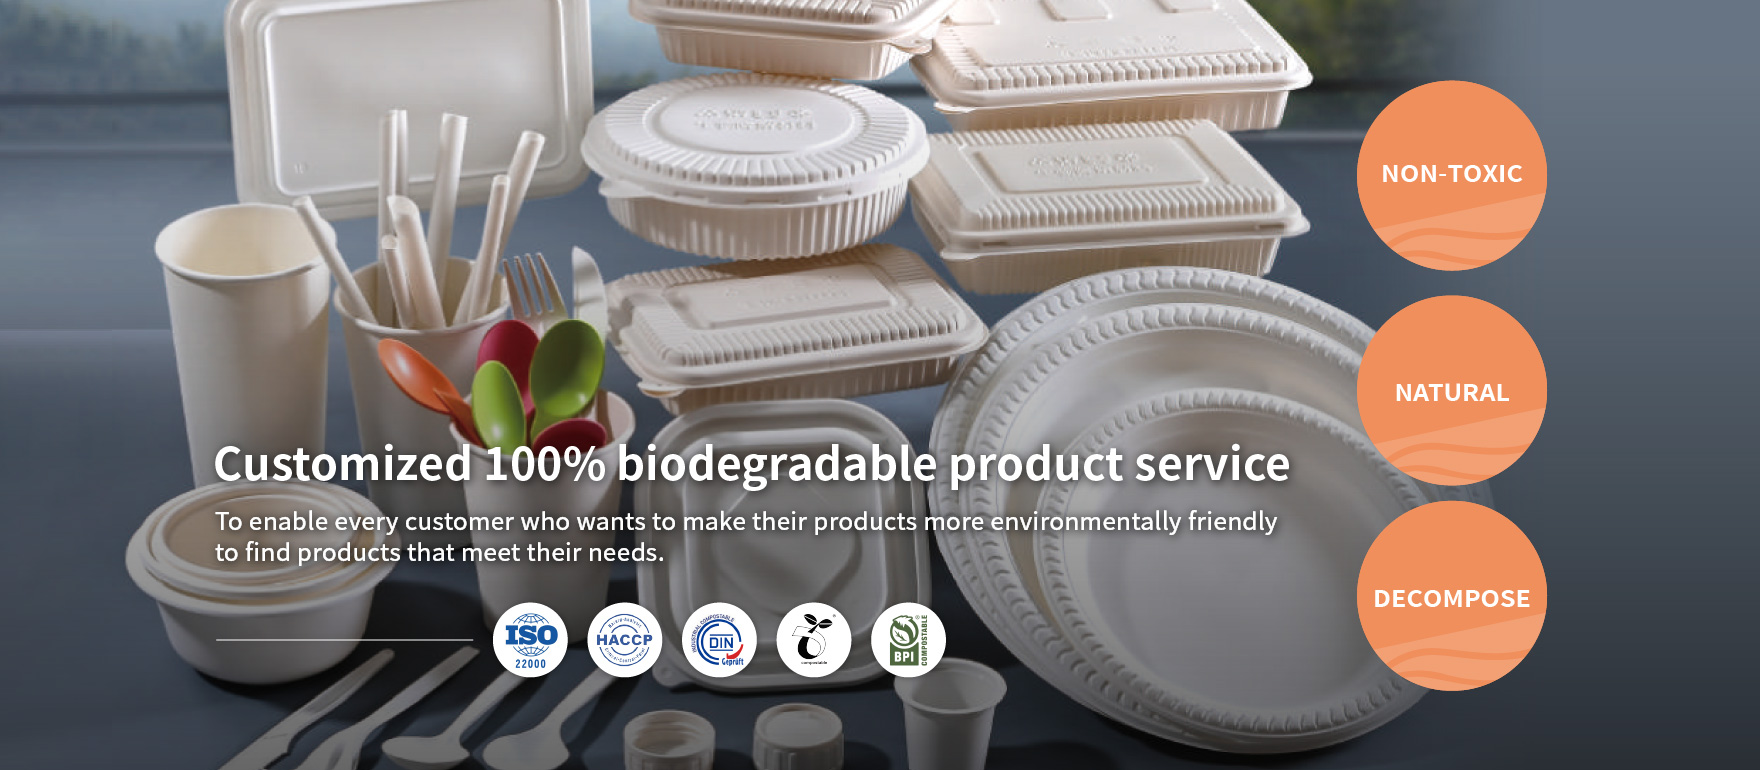 Customized 100% biodegradable product service